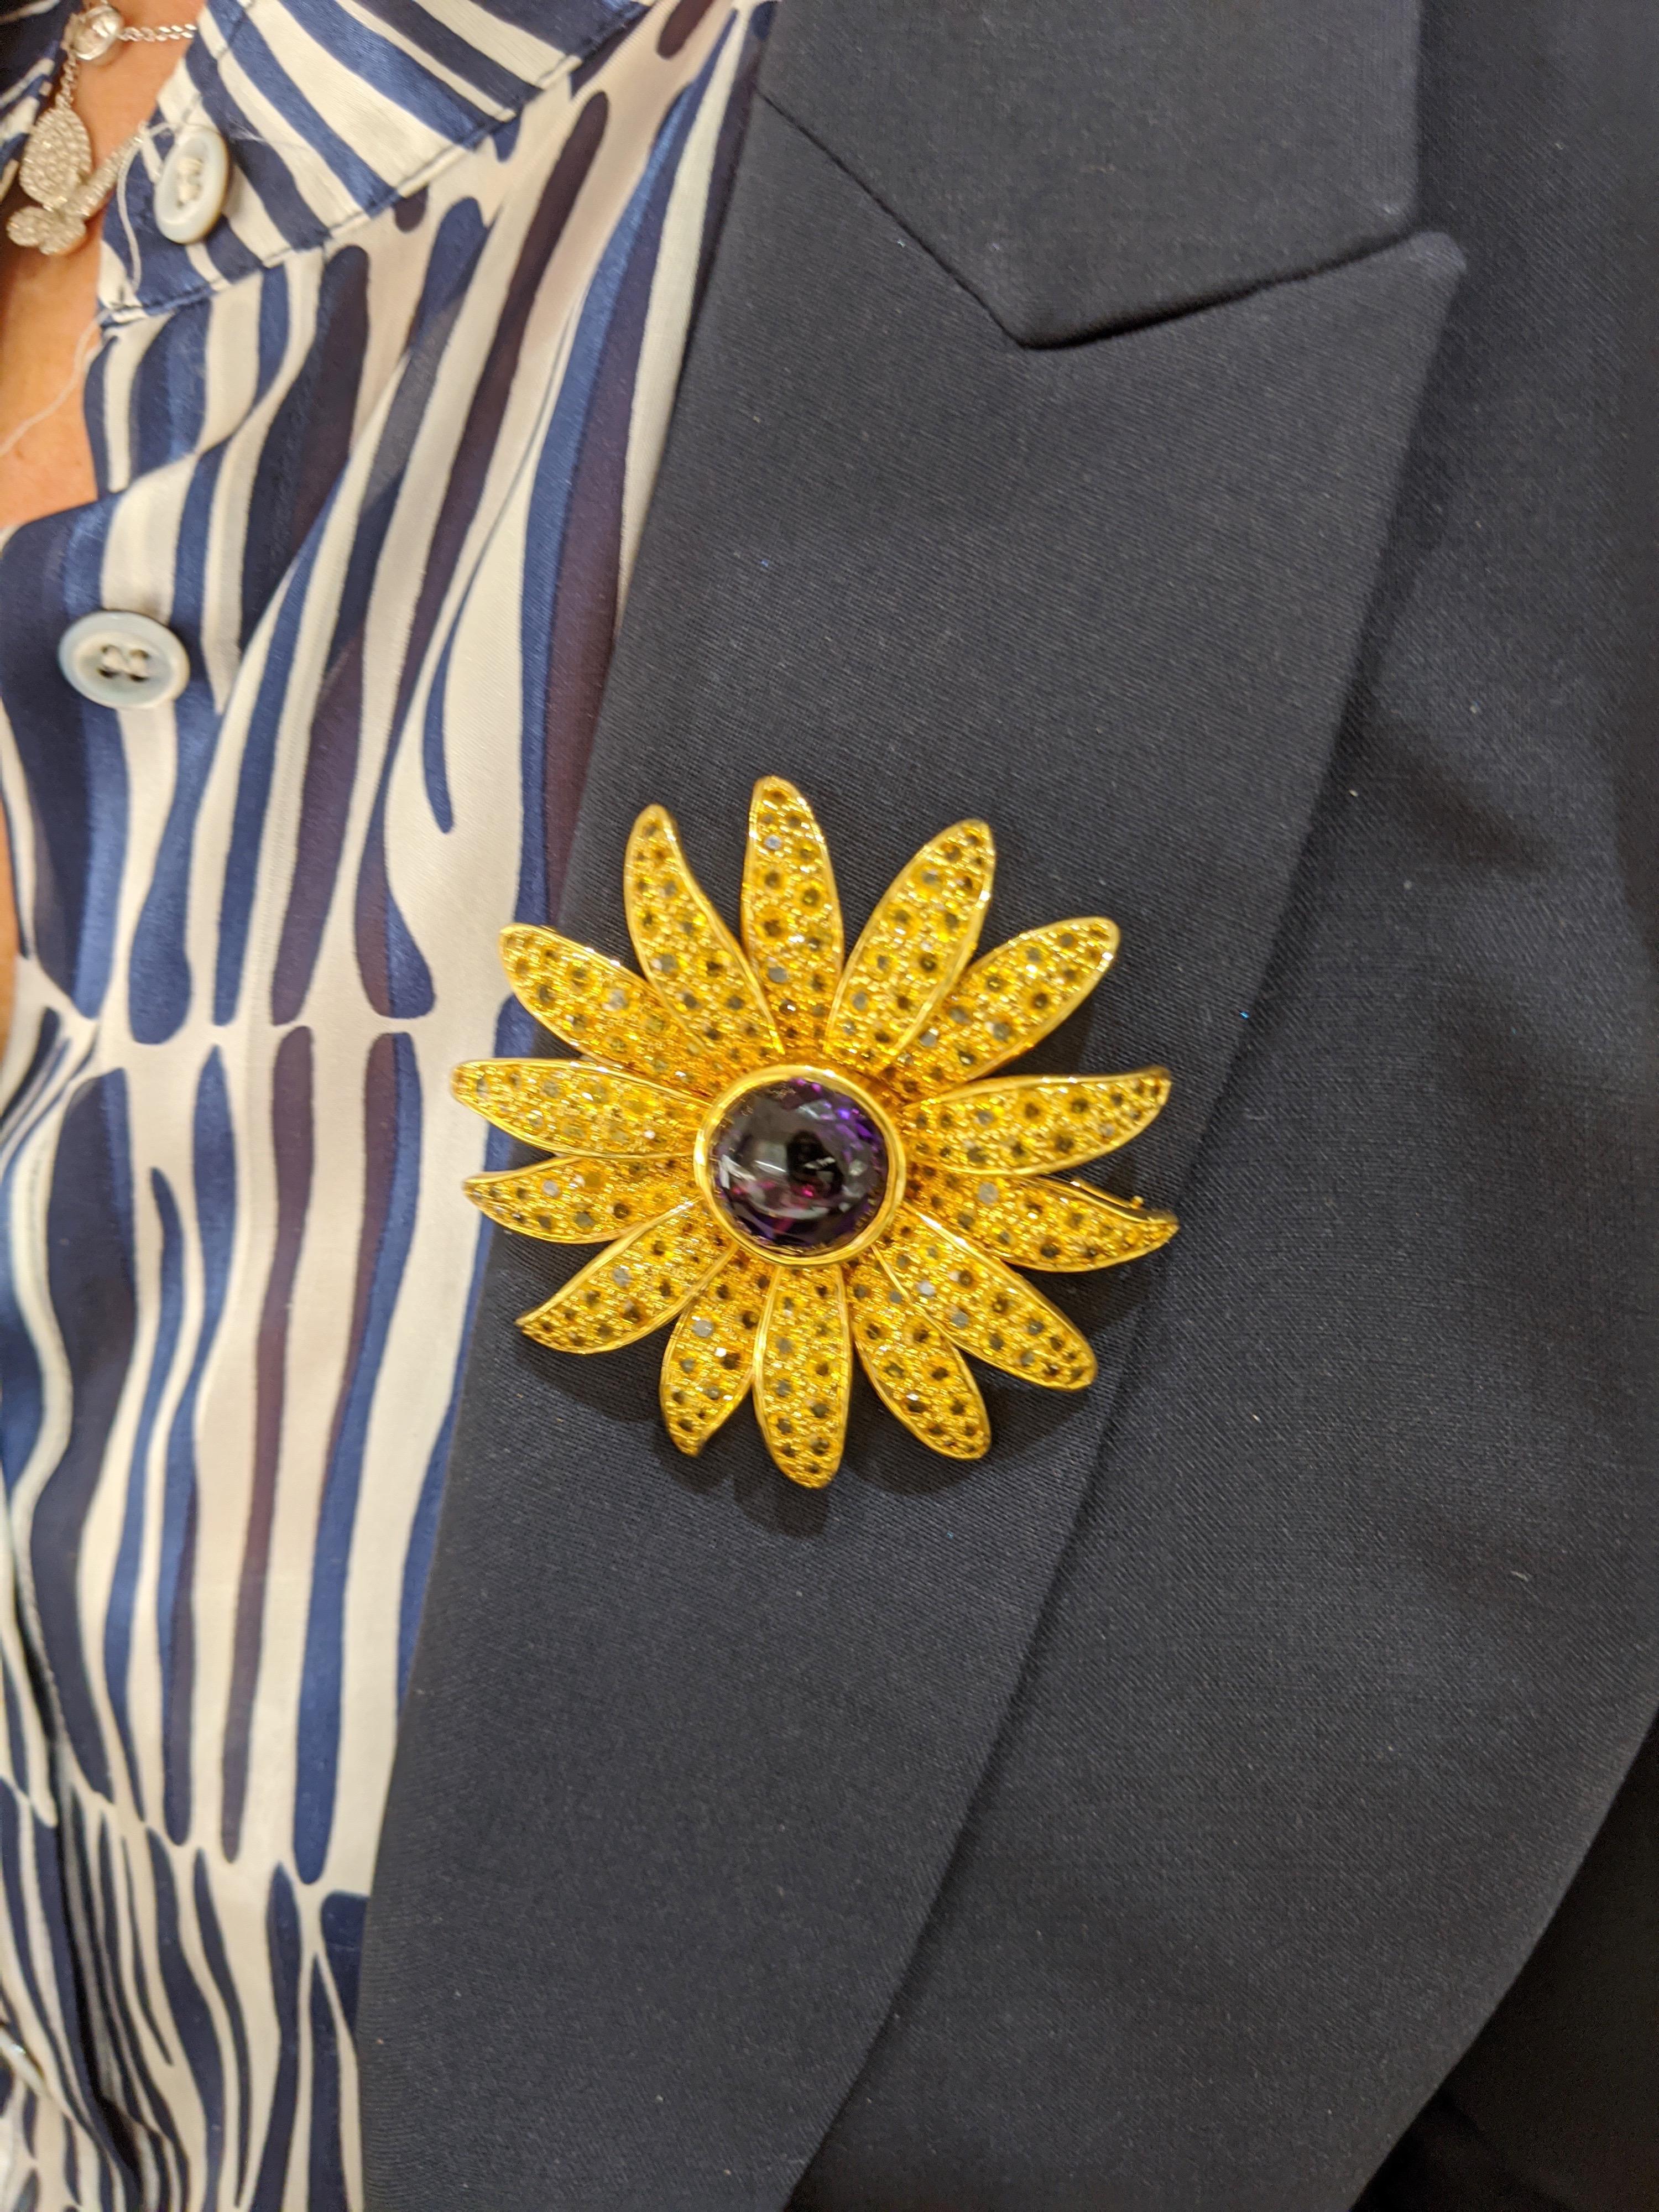 Women's or Men's 18kt Gold Sunflower Brooch, 20.24ct Yellow Sapphires and 15.58 Carat Amethyst